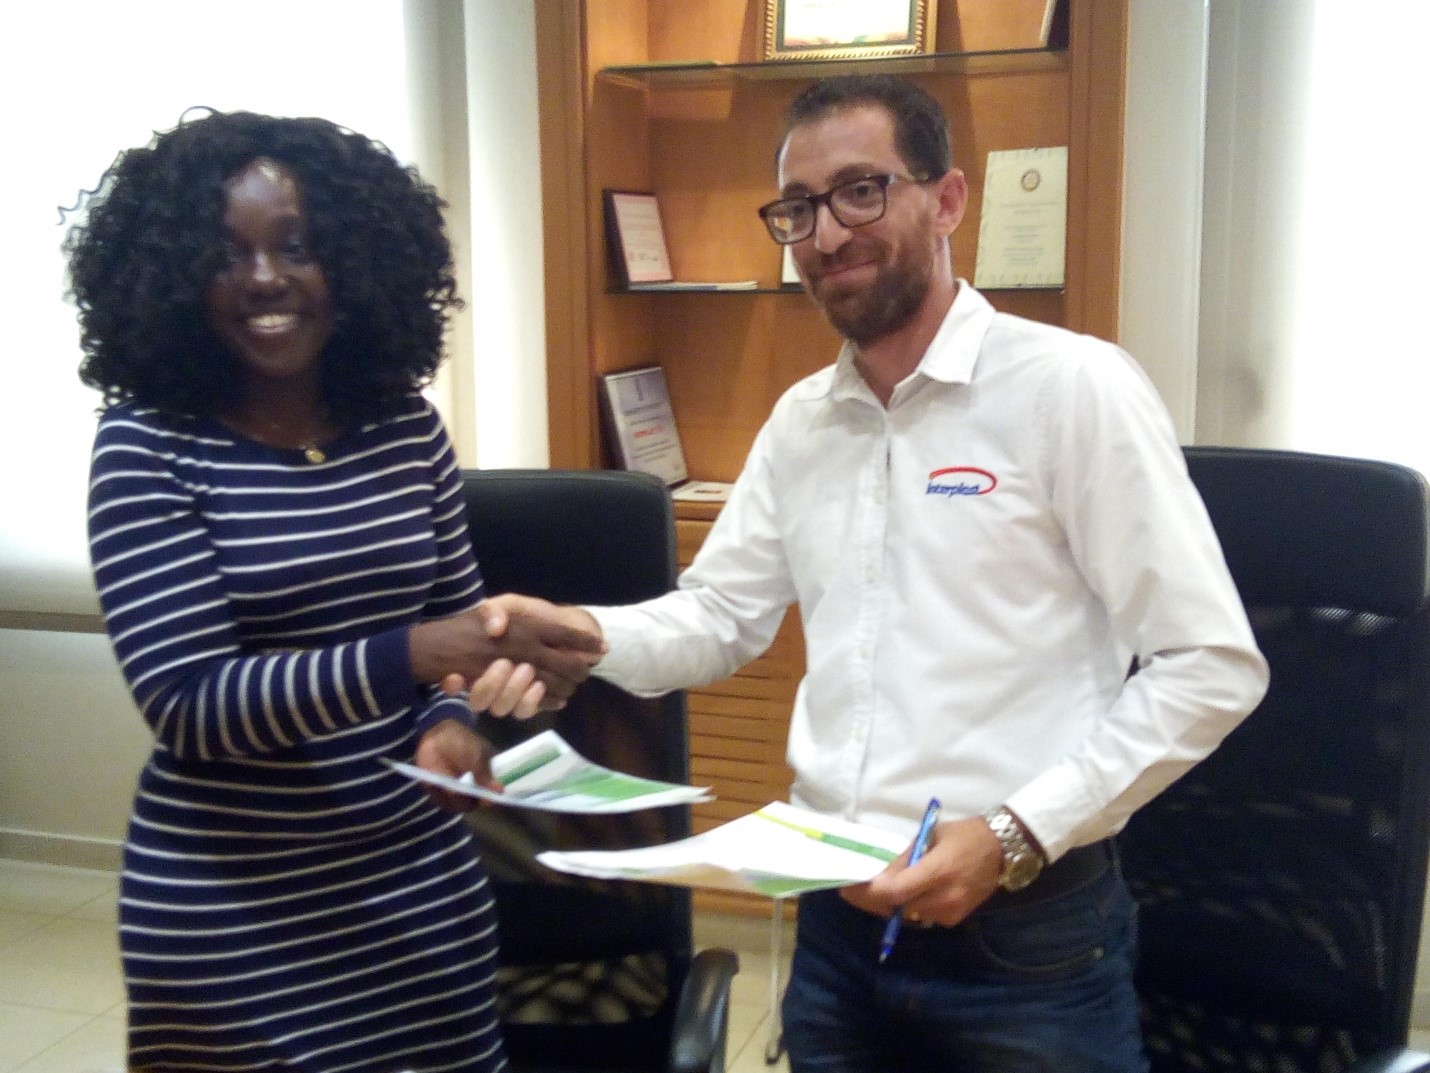 Alberta Nana Akyea Akosa of Agrihouse Foundation receiving the support documents from Mr Haidar Malhas of Interplast Limited